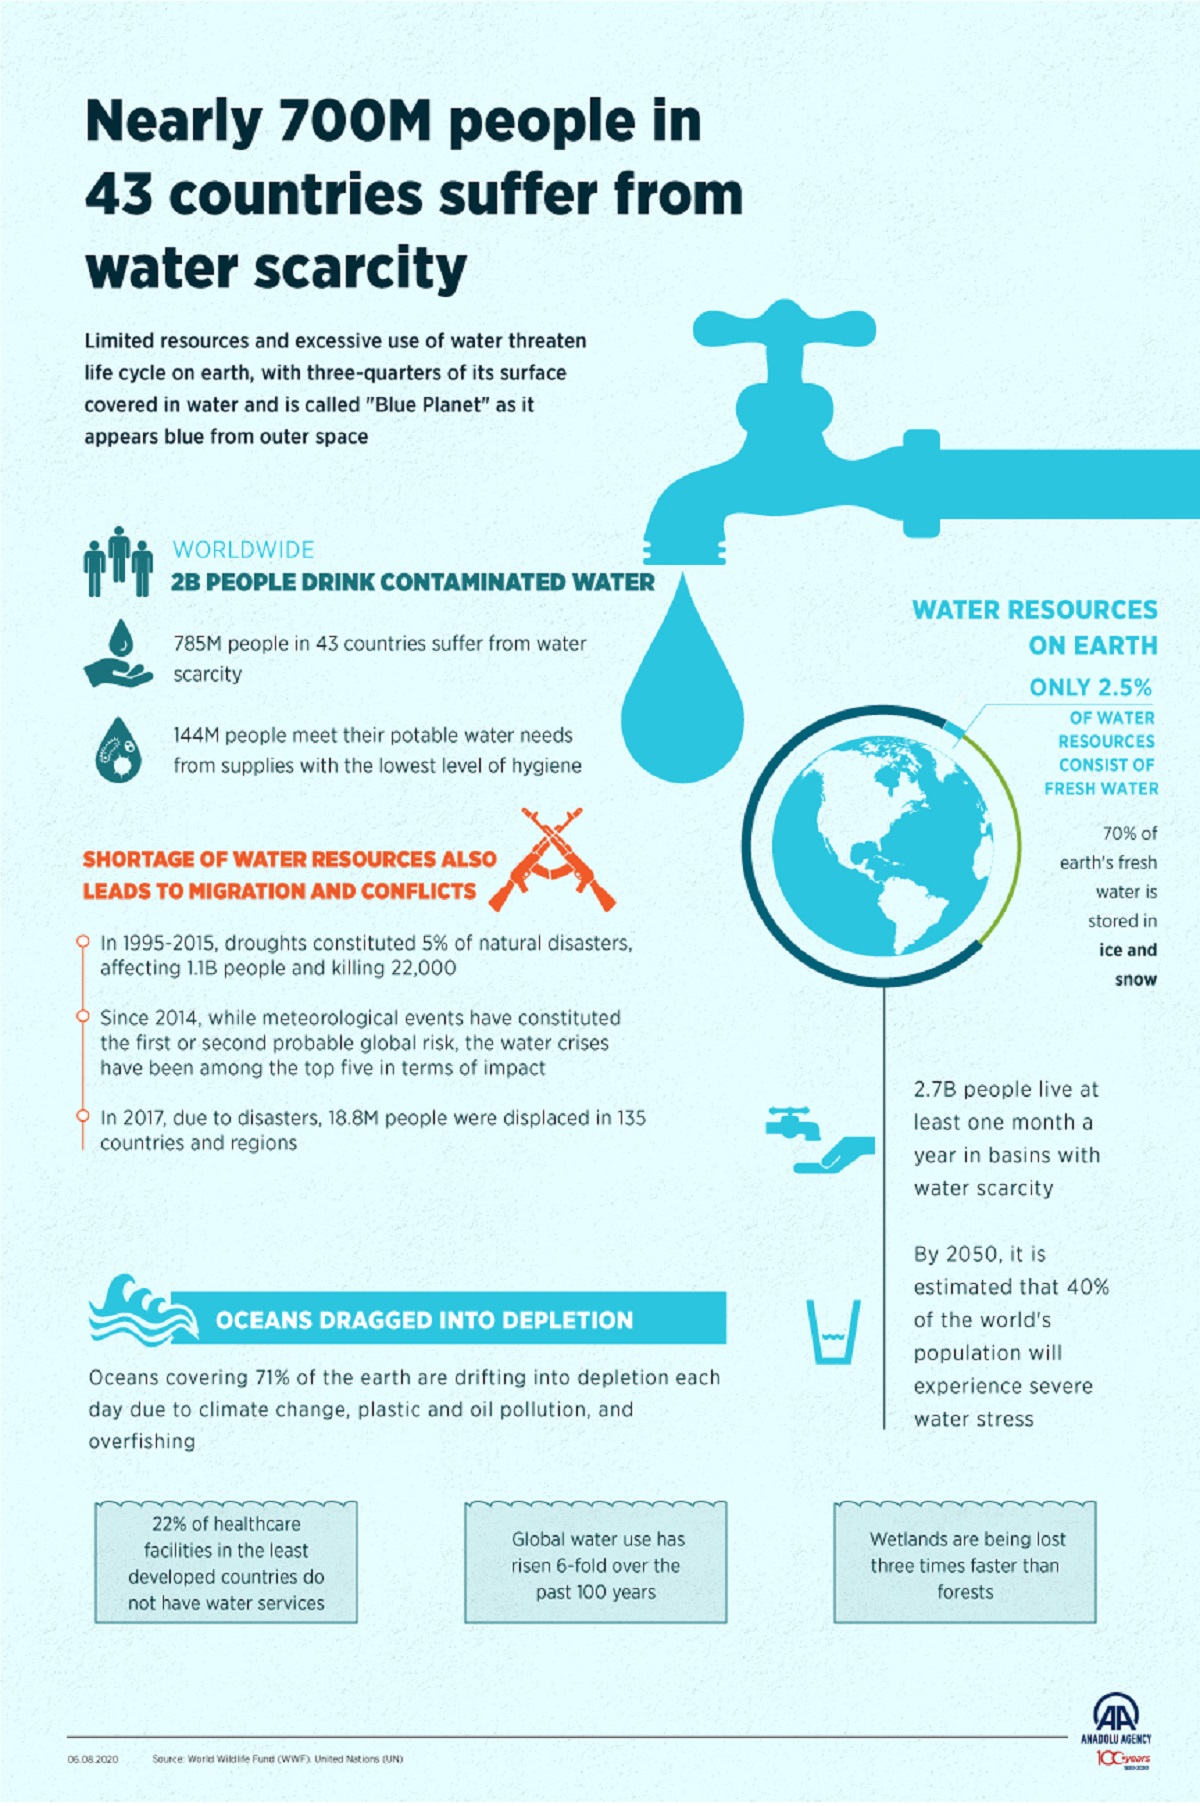 Nearly 700M people in 43 countries suffer from water scarcity